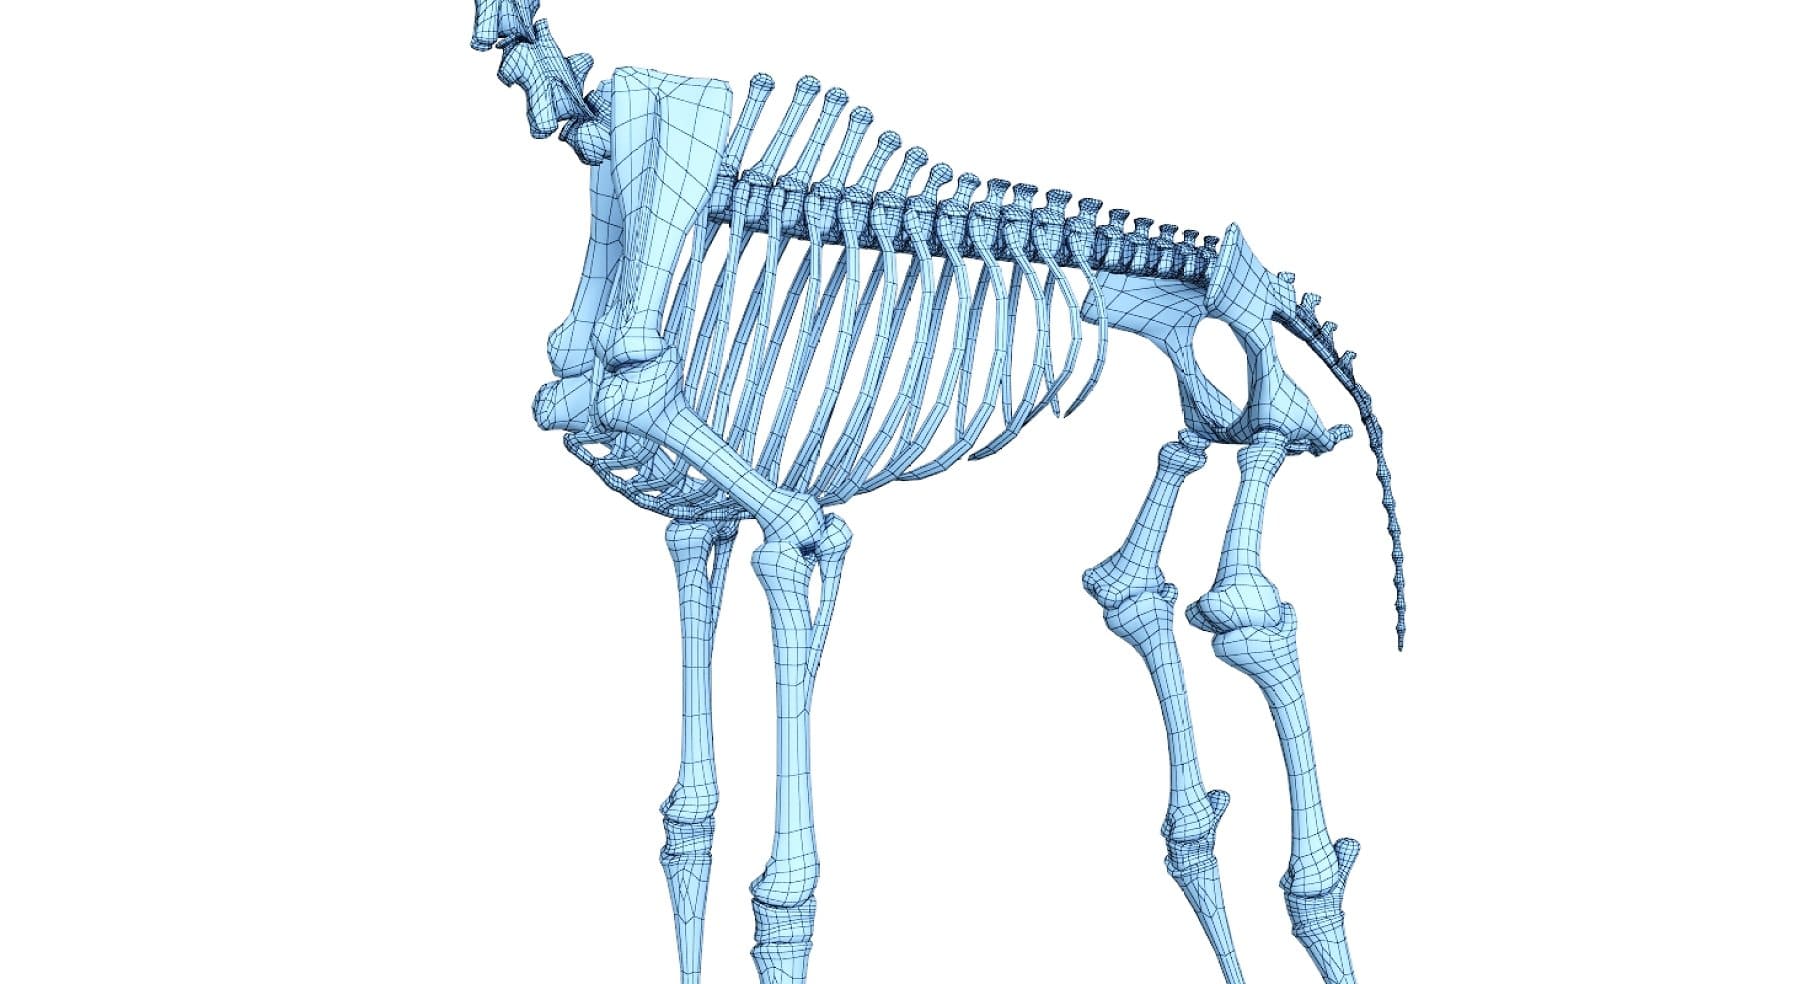 Image of the chest of a giraffe skeleton.